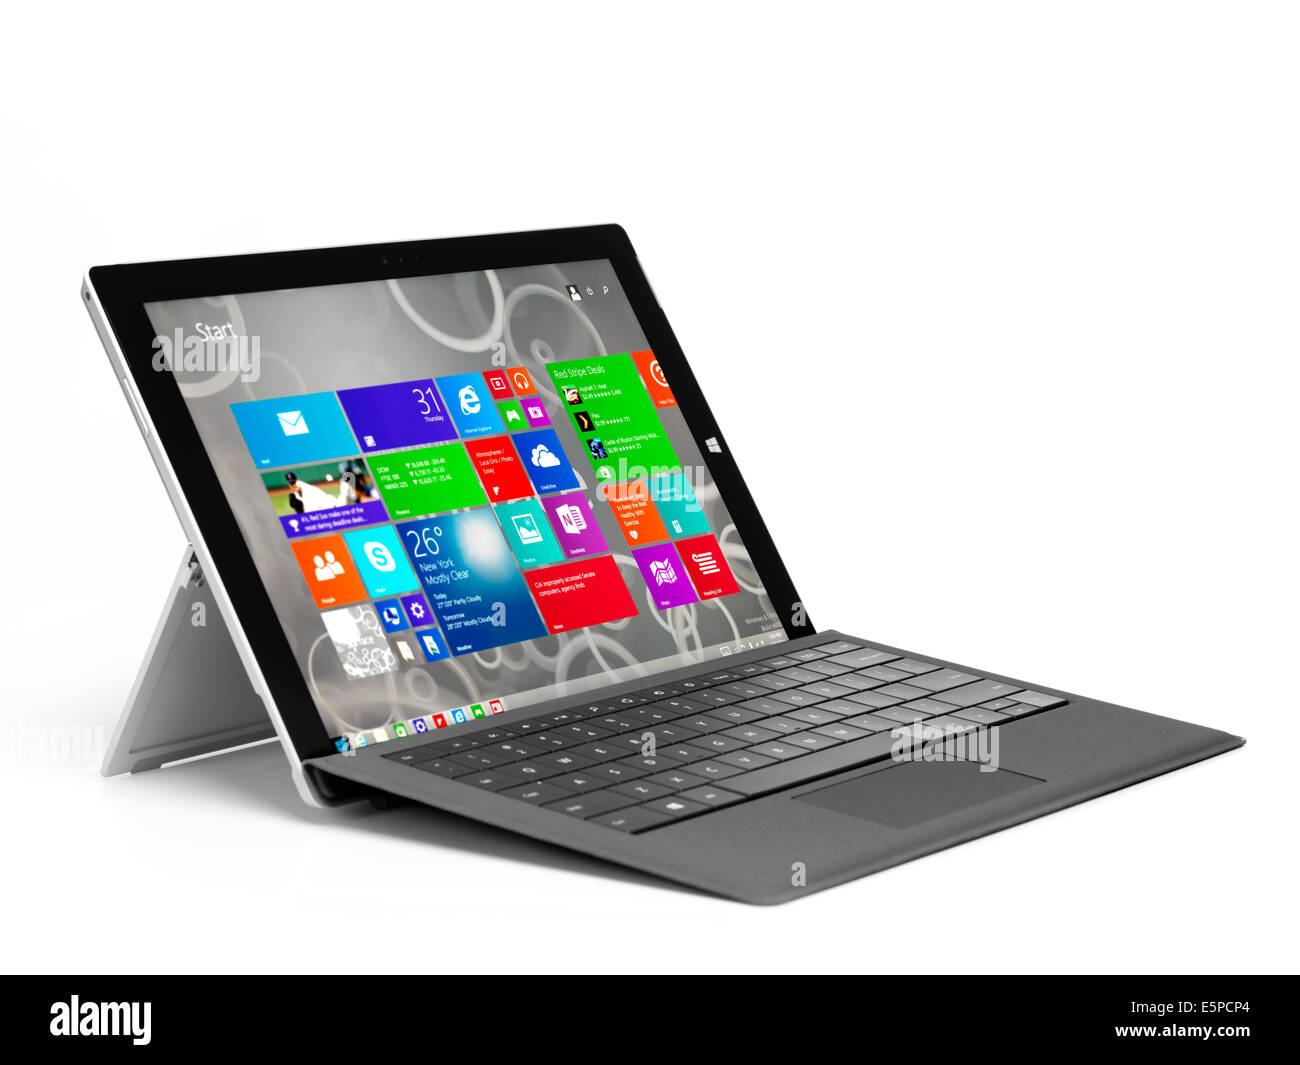 Microsoft Surface Pro 3 tablet computer with a black keyboard and start screen on its display isolated on white background Stock Photo